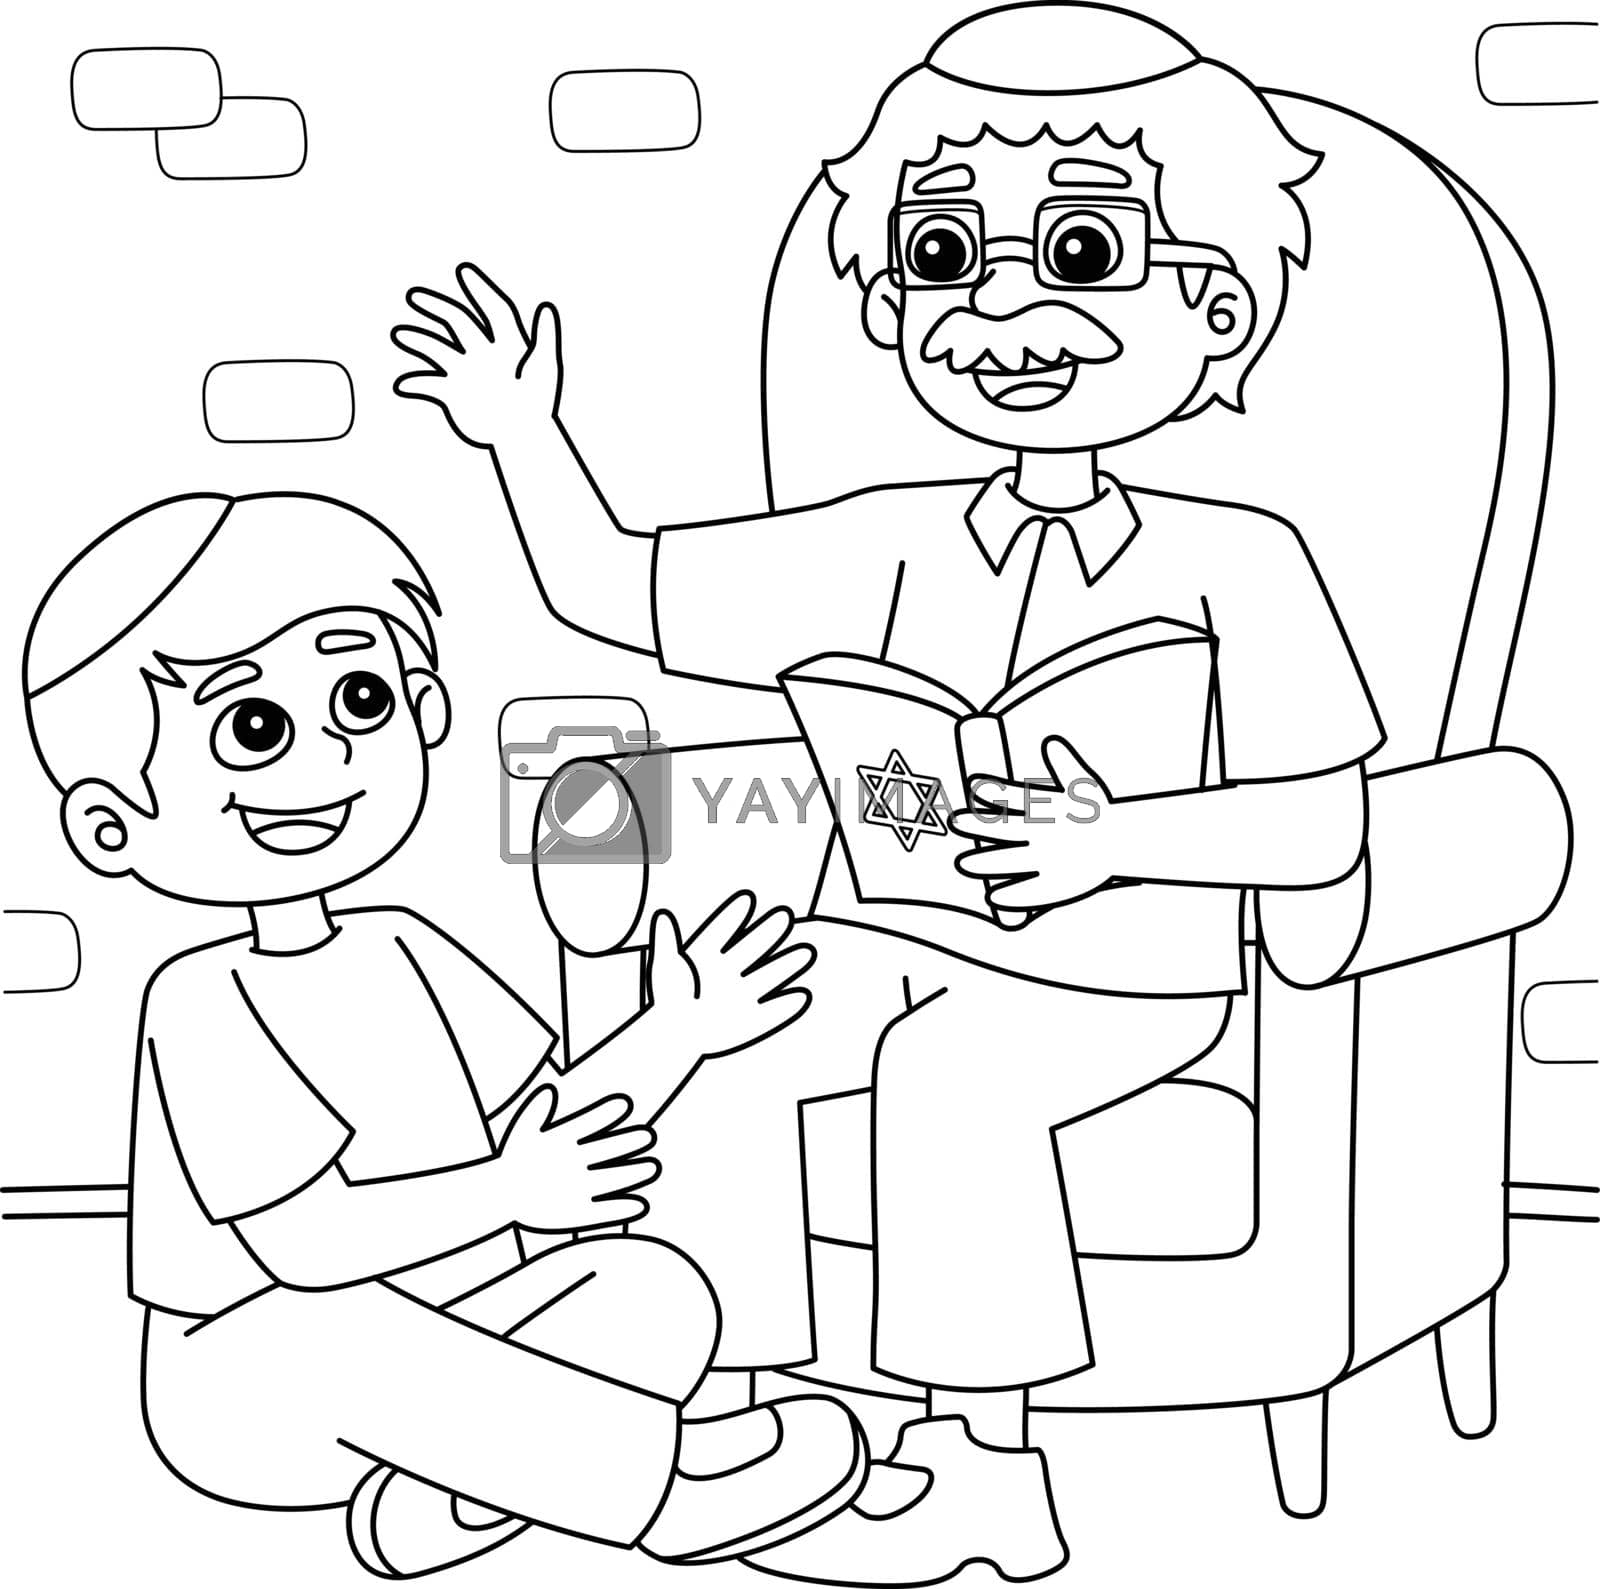 Royalty free image of Hanukkah Grandfather Tells Stories Coloring Page by abbydesign